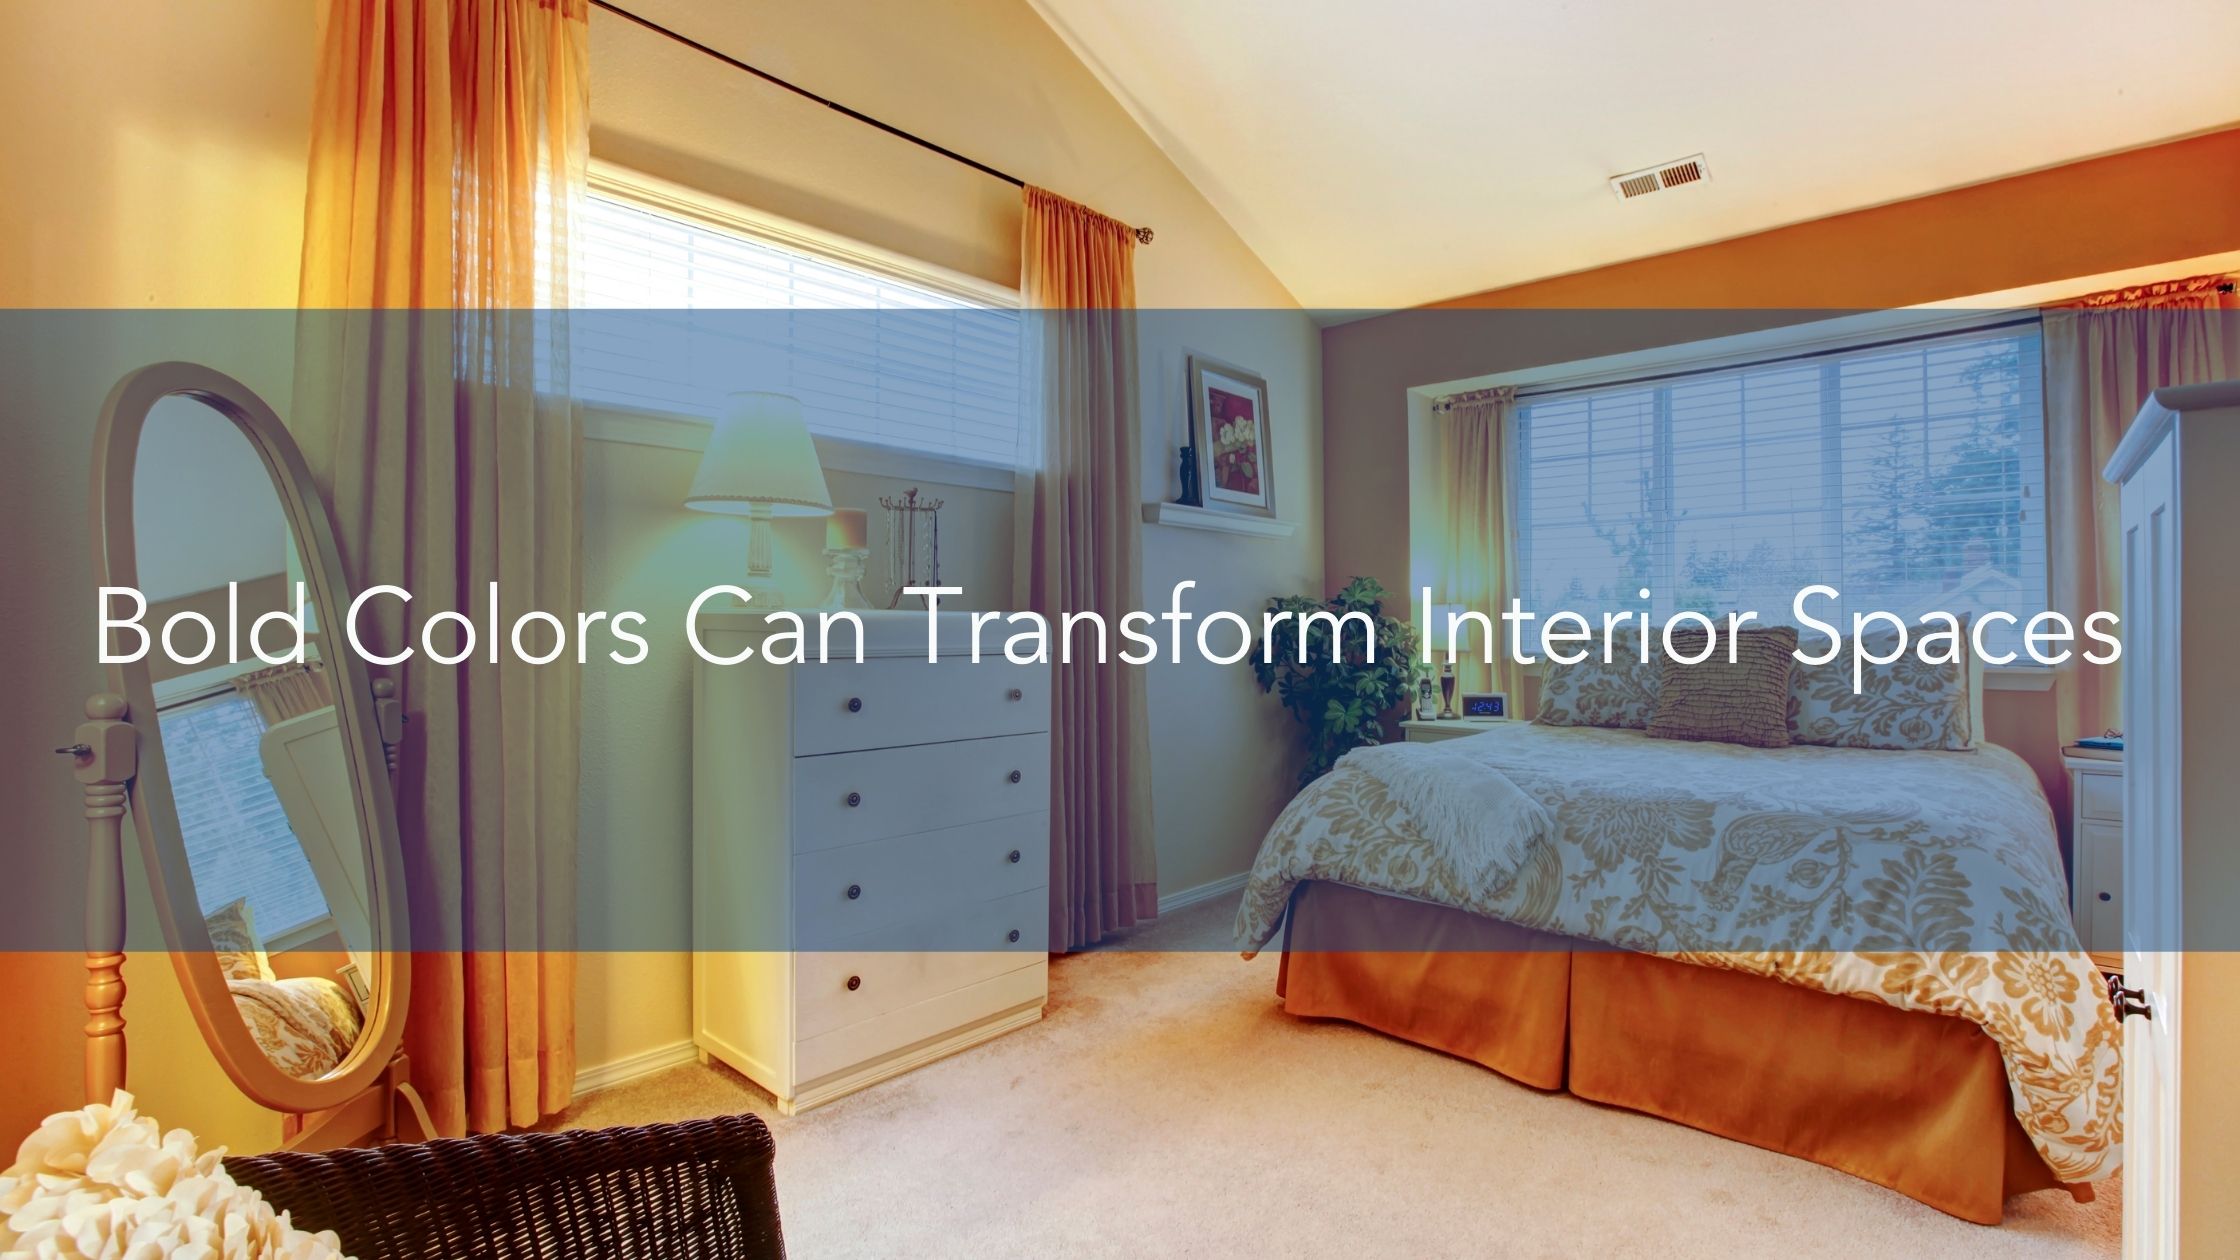 Bold Colors Can Transform Interior Spaces